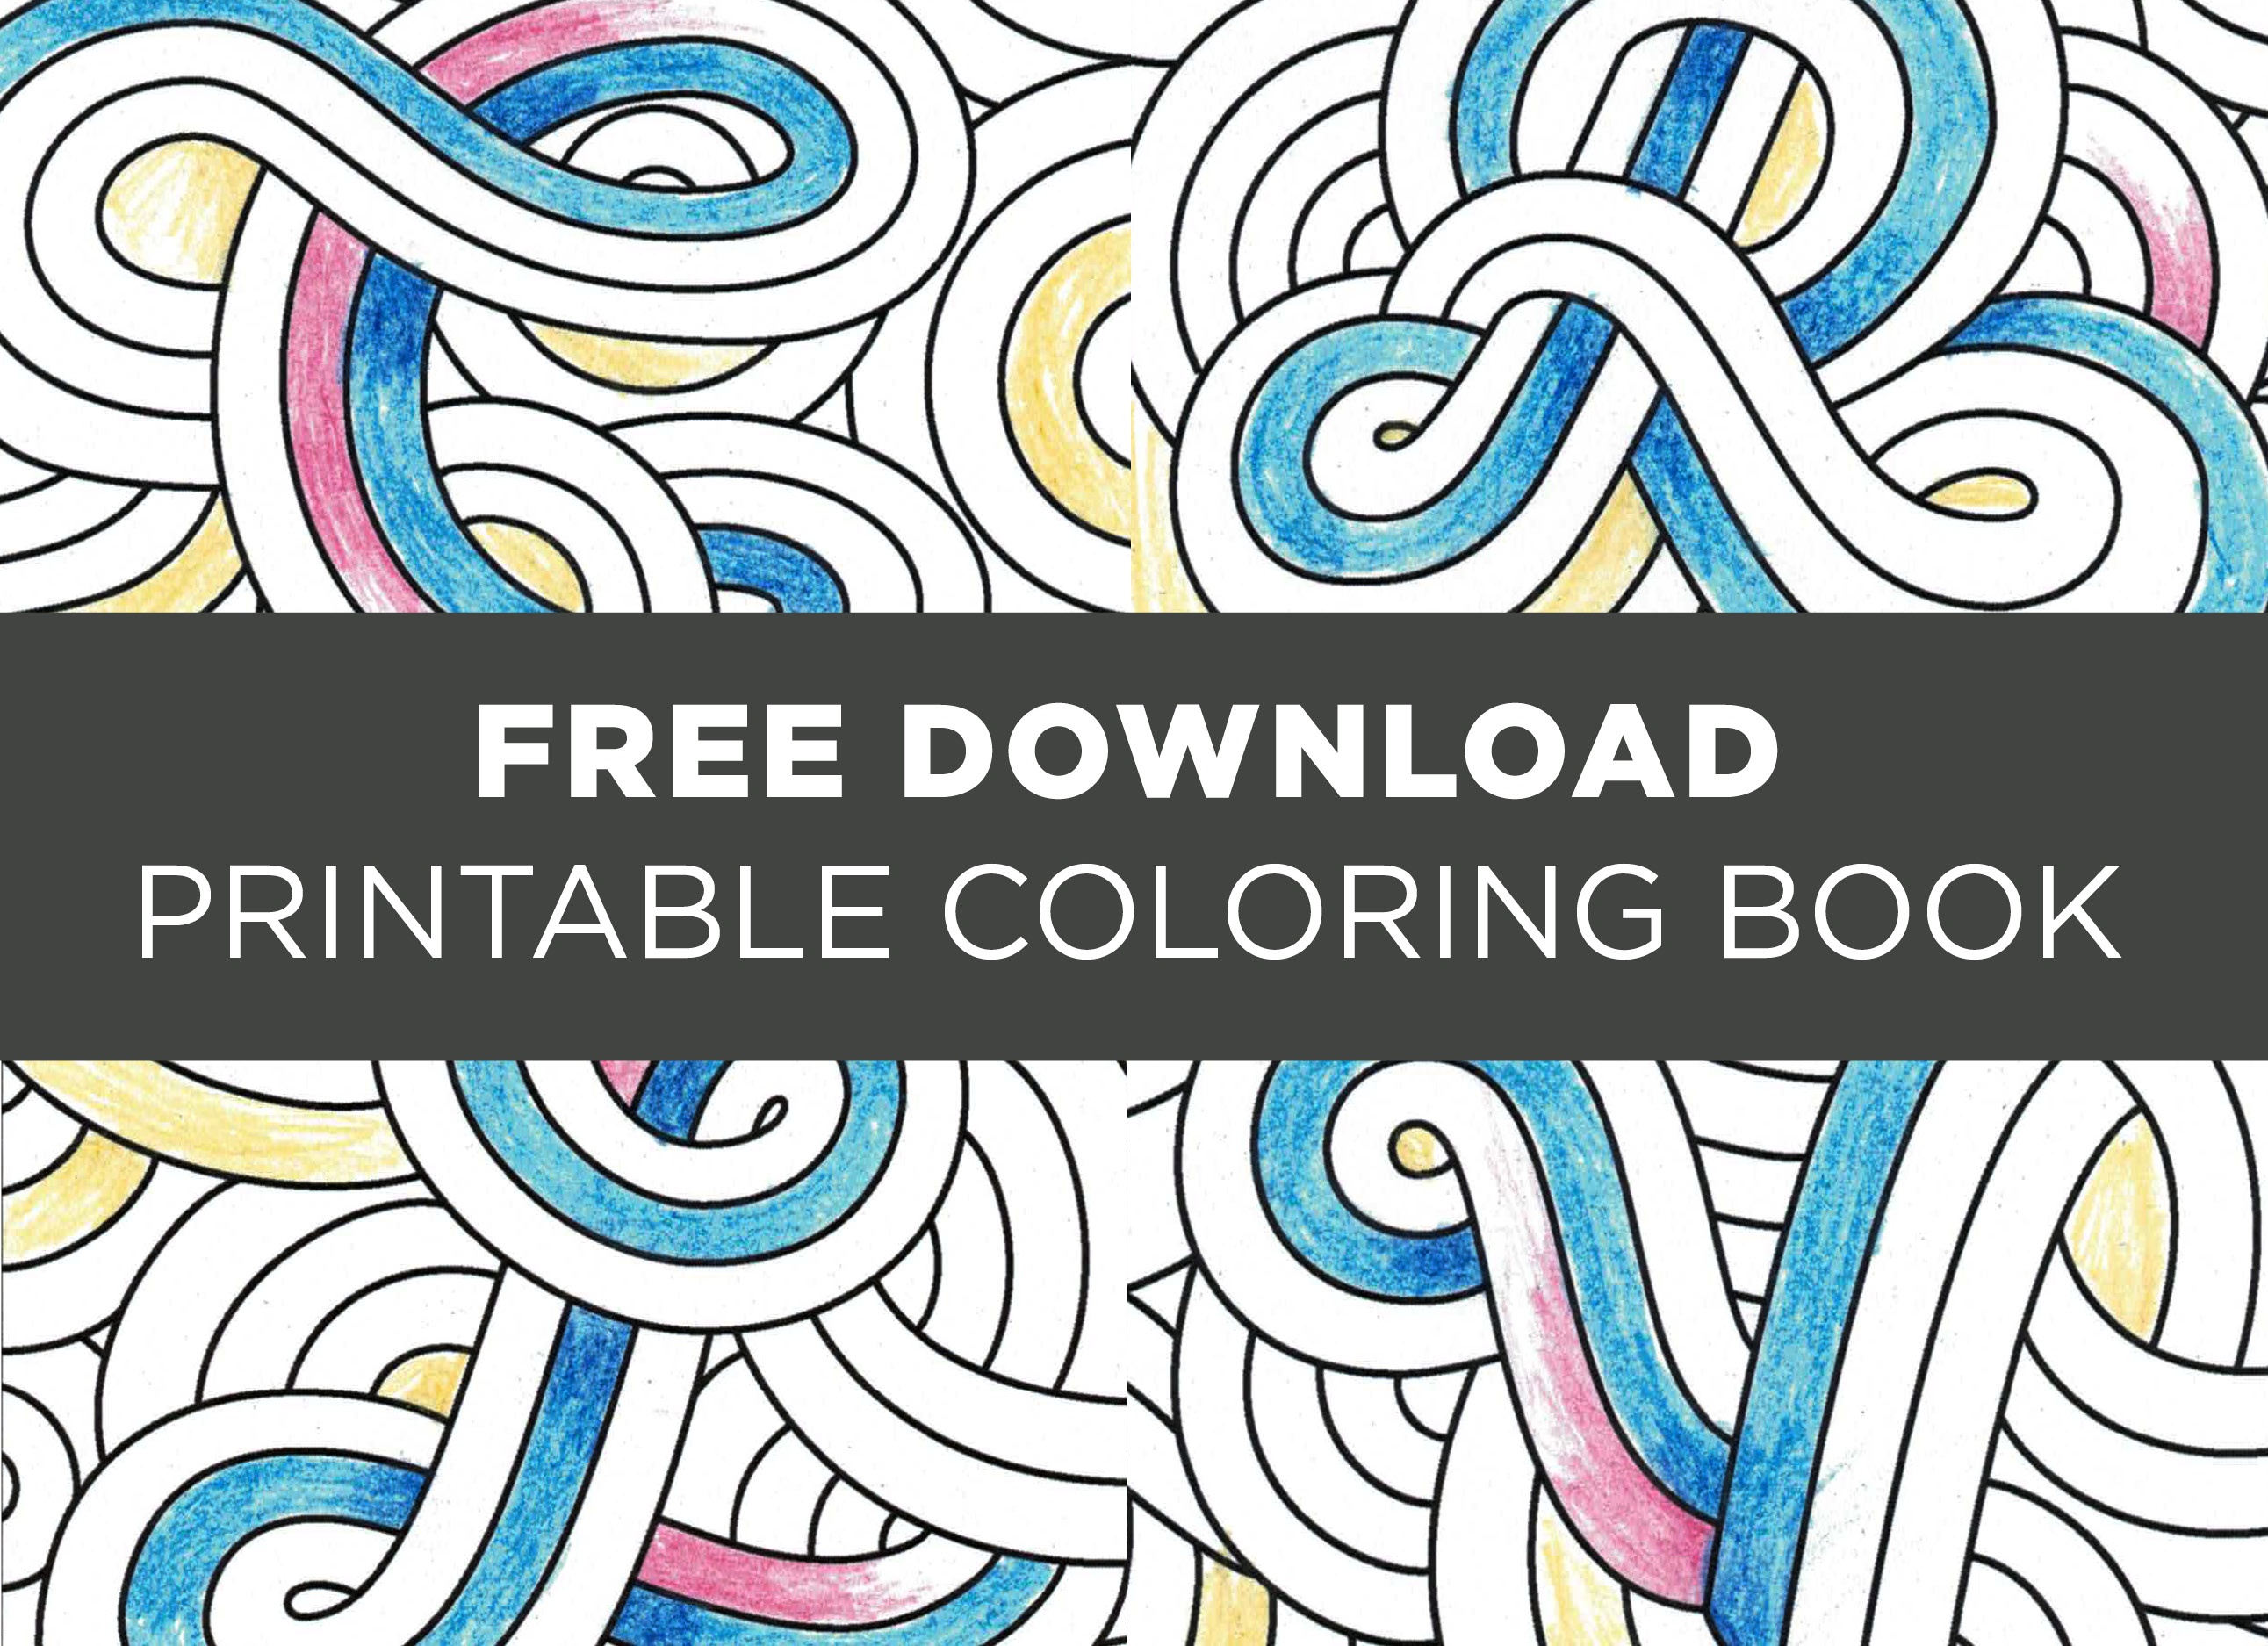 Download The Creativelive Printable Coloring Book - Free Printable Coloring Book Download